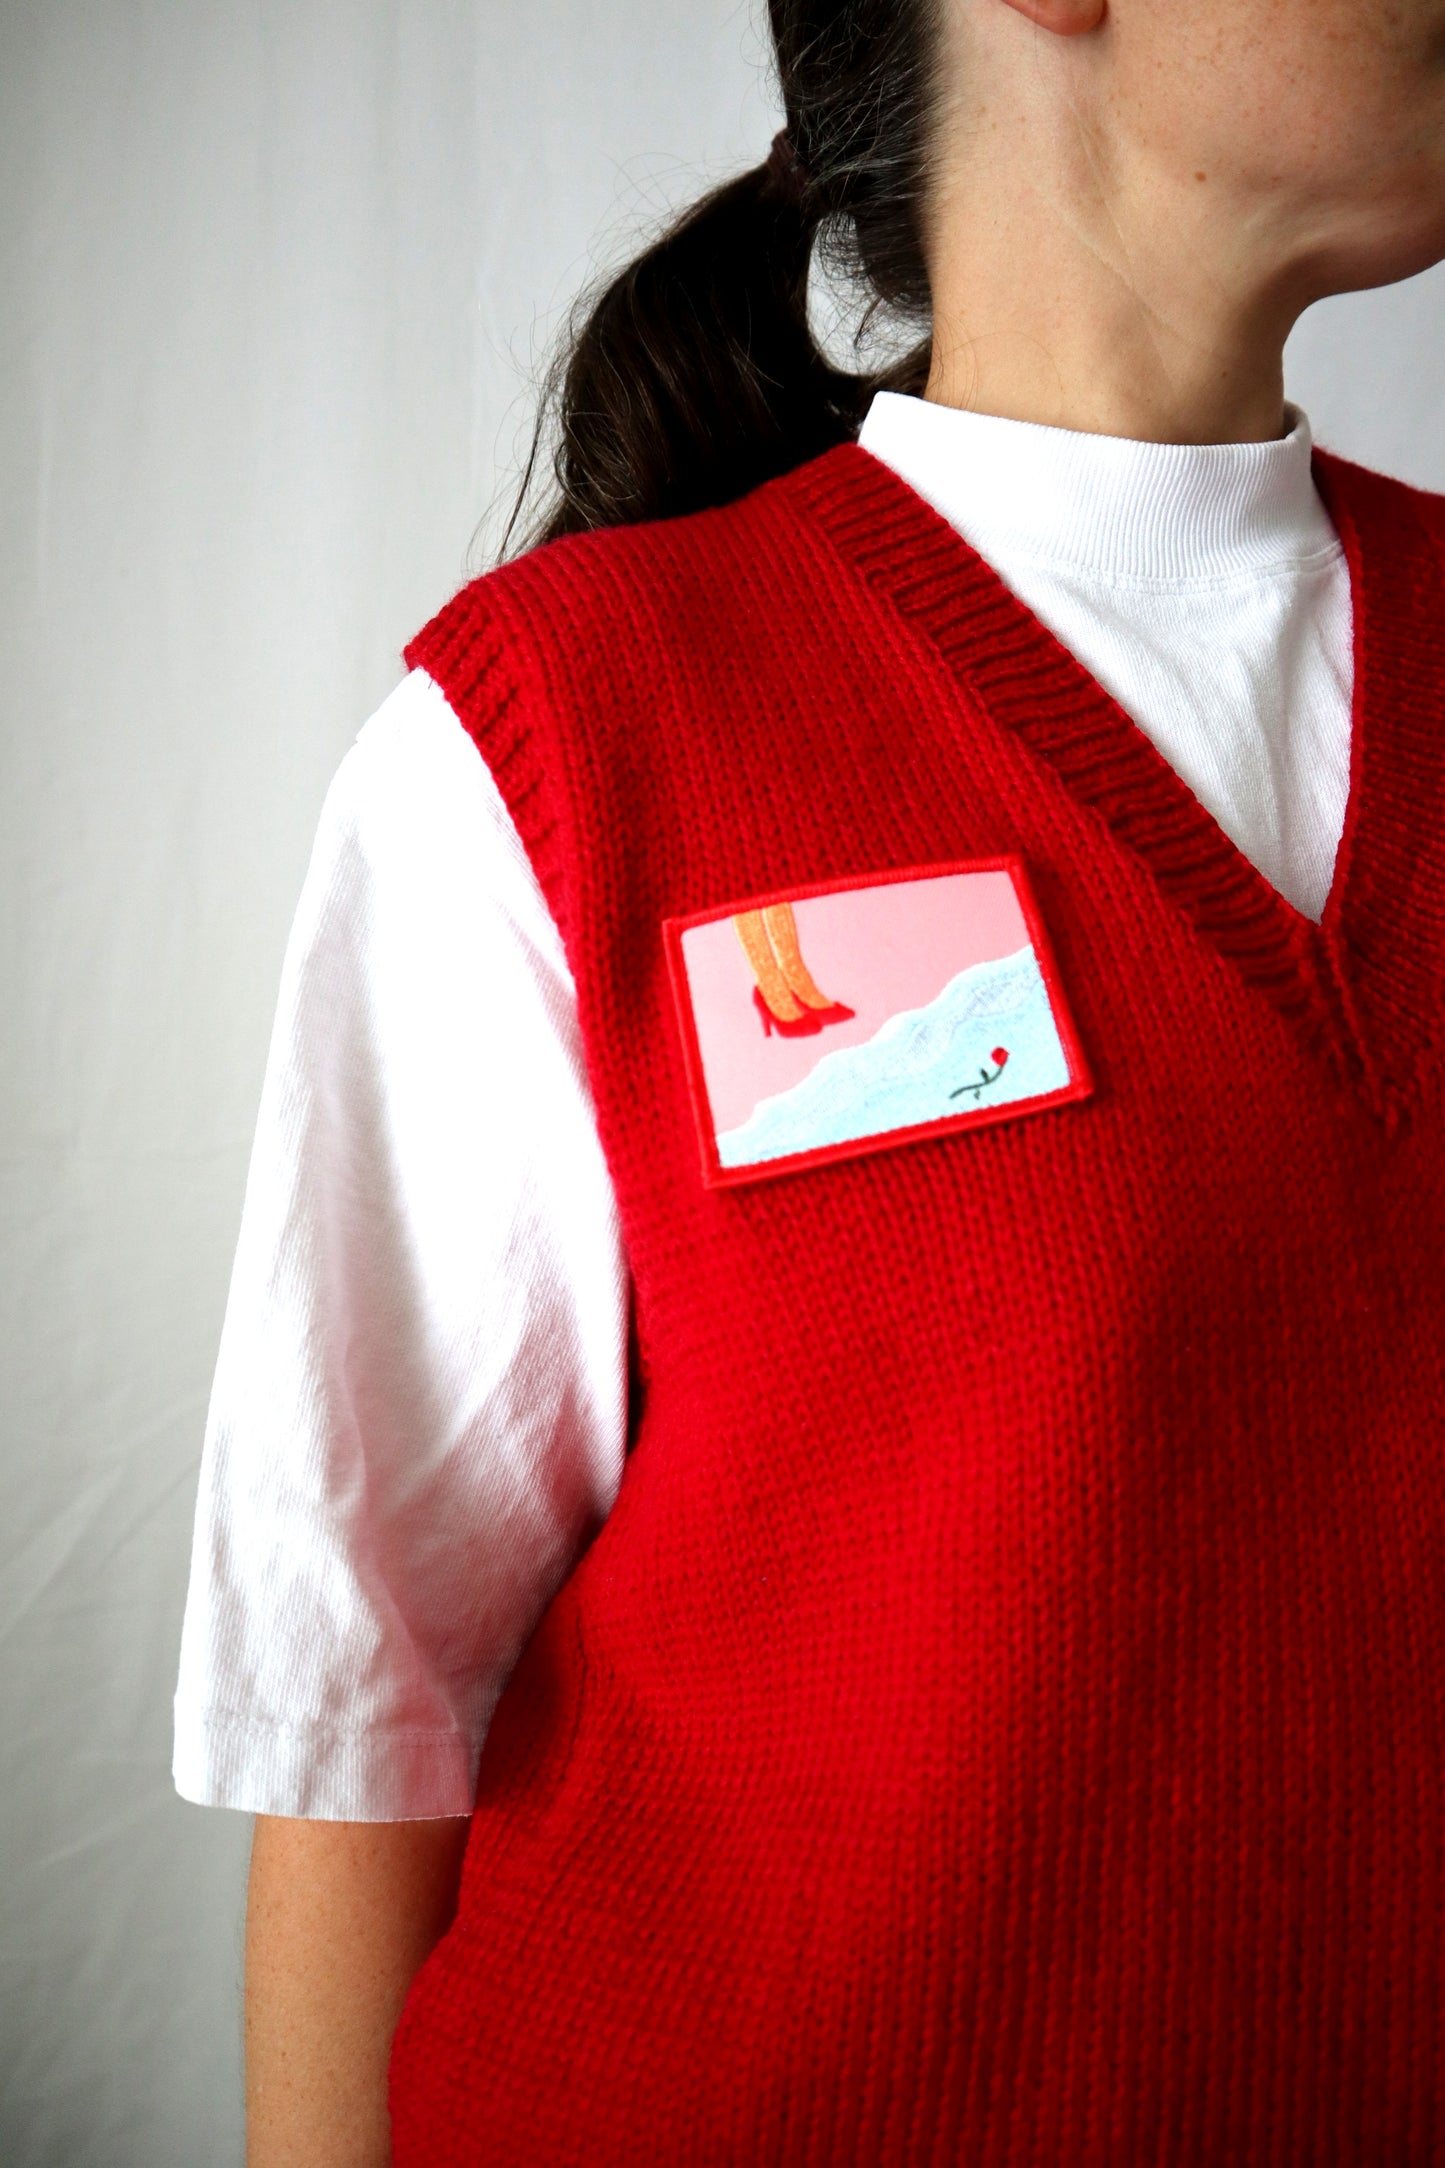 'Within, Without' Vest